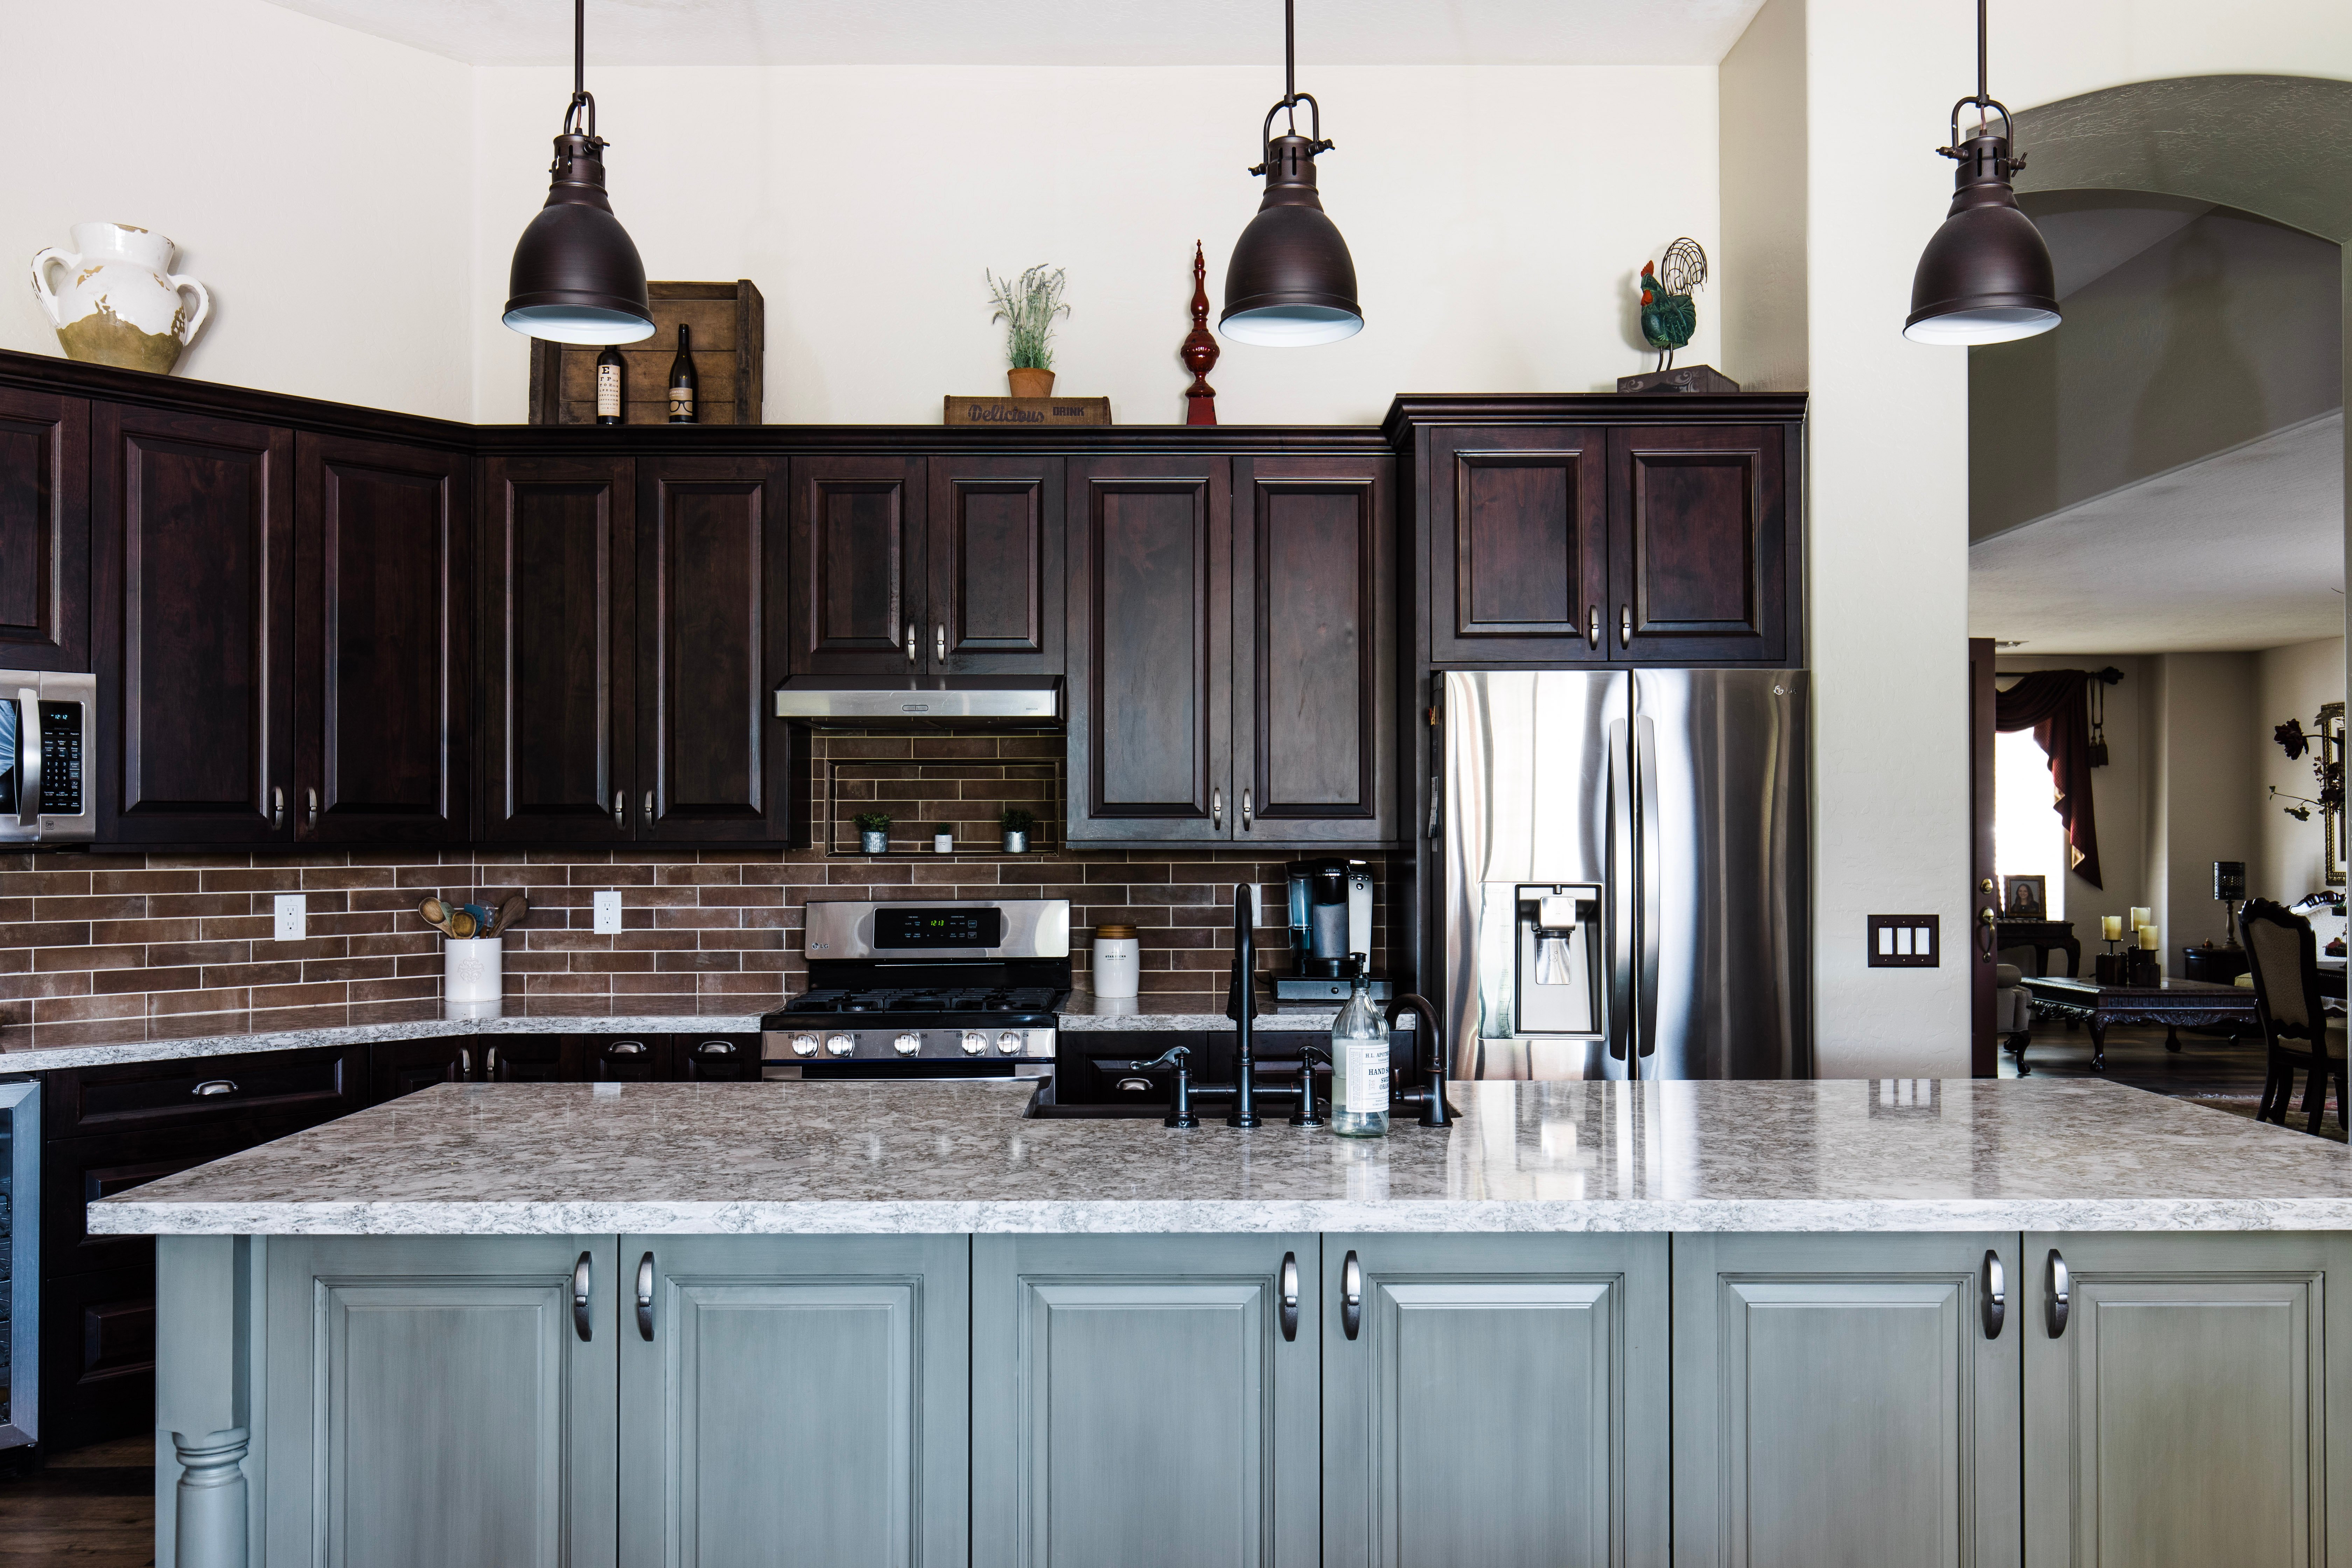 Tempe kitchen remodeling contractor, hochuli design and remodel